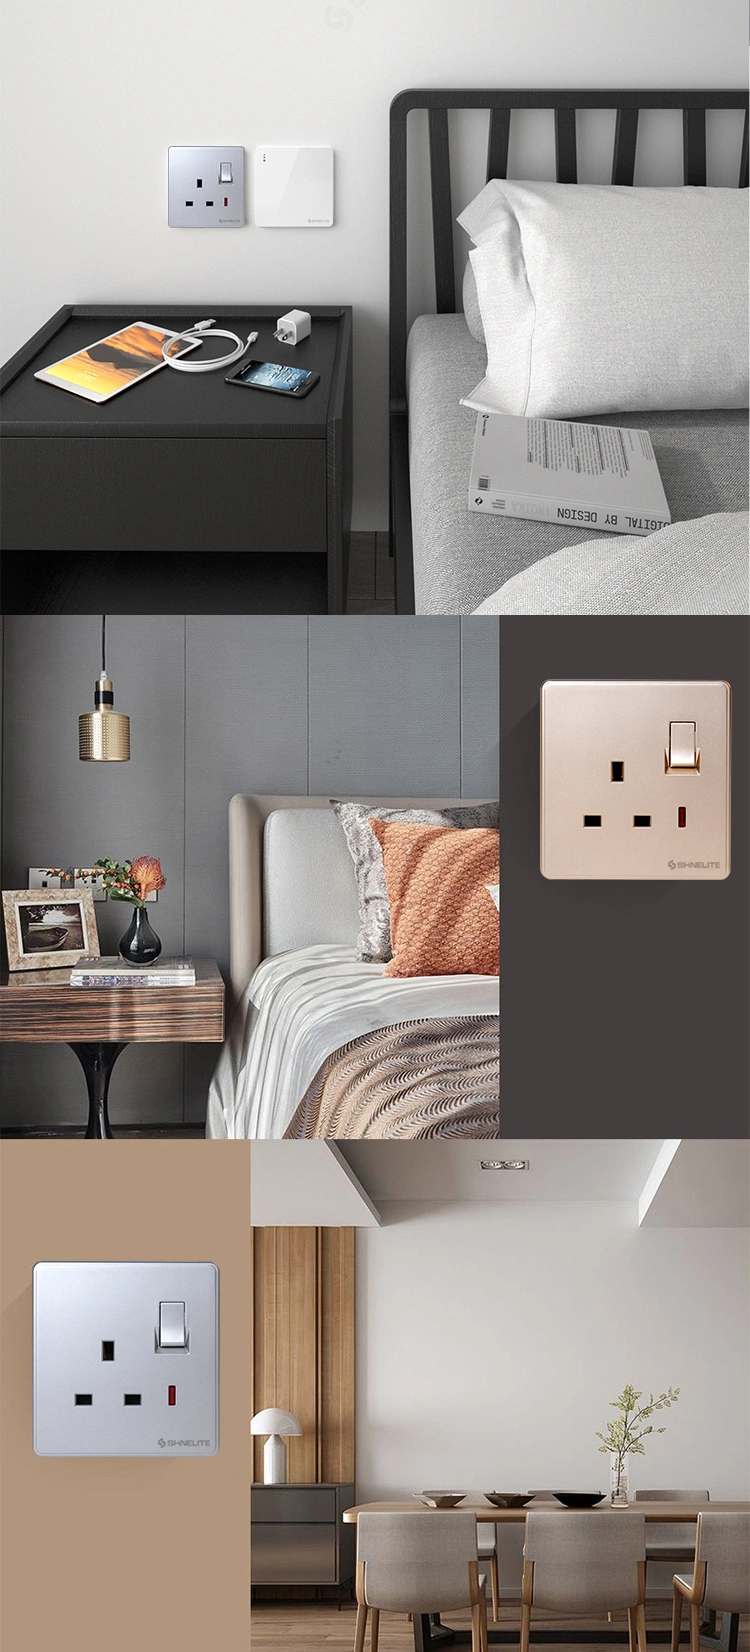 12 Years BS Standard Wall Light Electrical Switch Socket Manufacturer